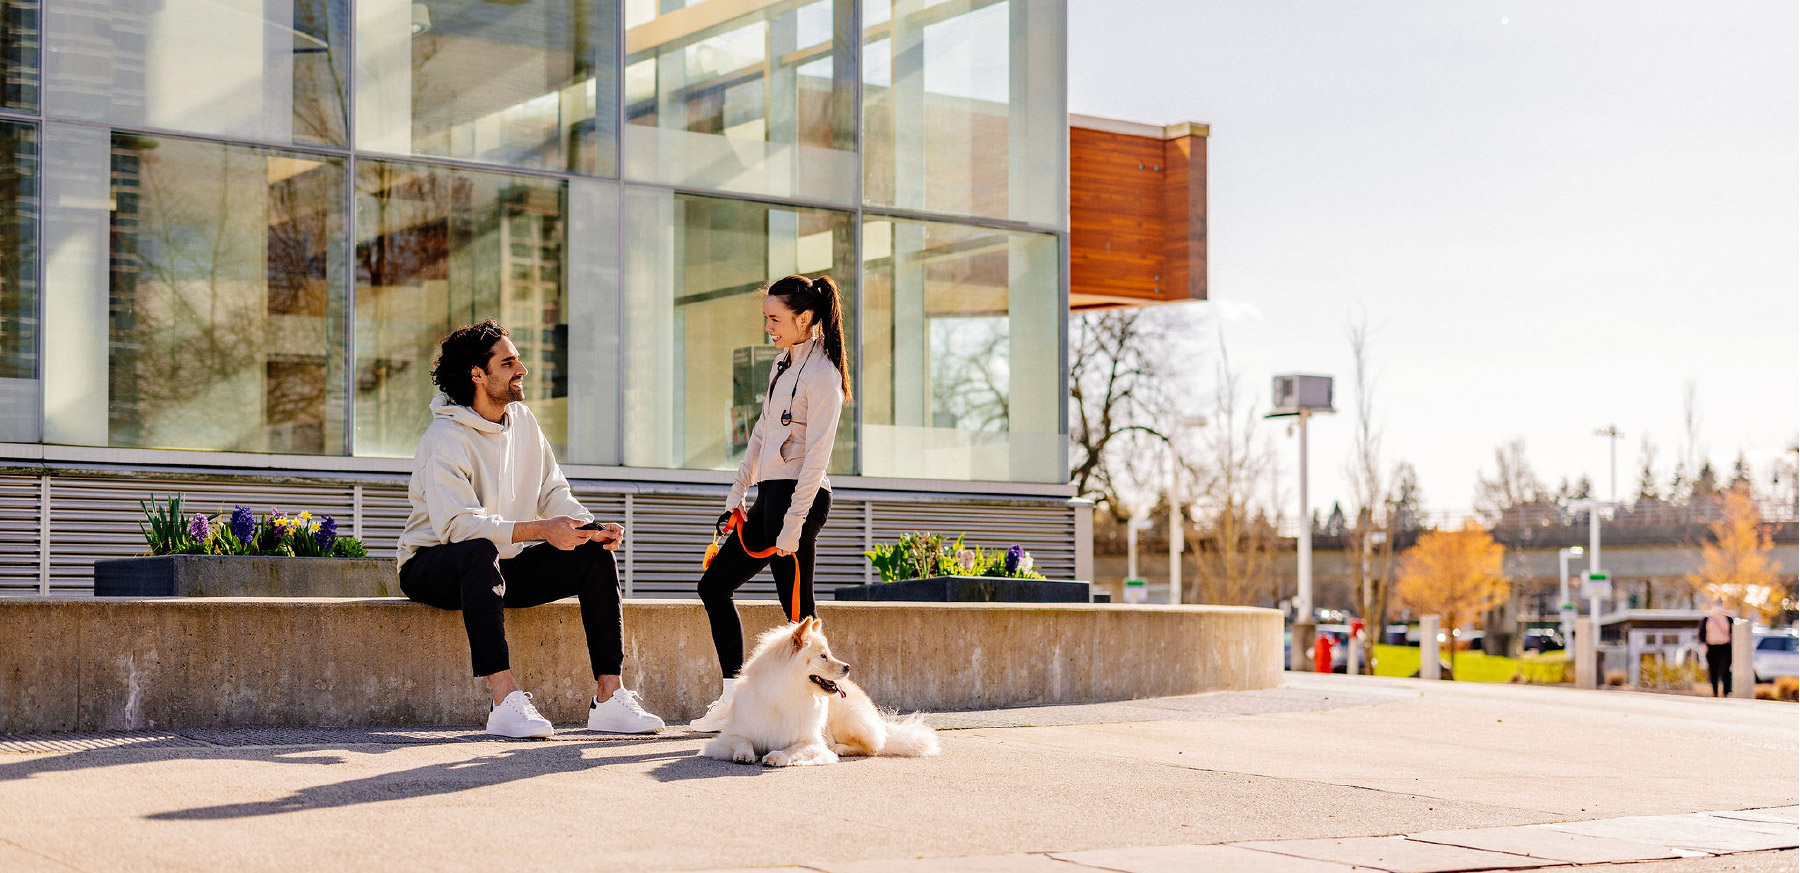 Athletic looking man and woman with a dog talking in front of a building